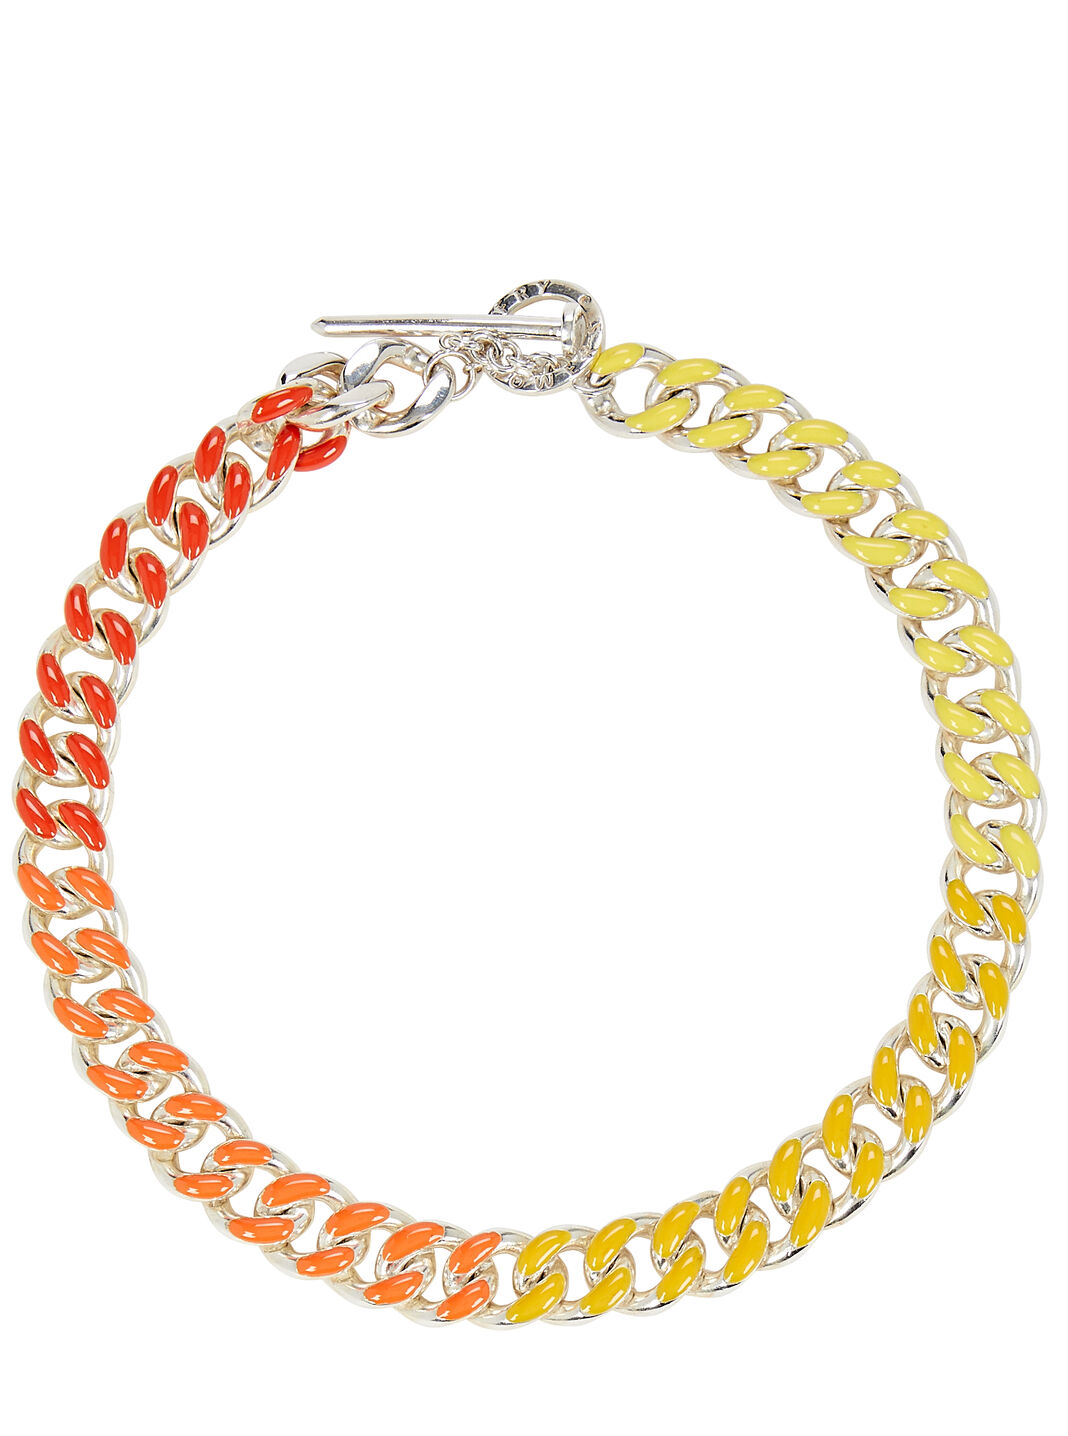 Ombr&eacute; Enamel Chunky Chain Necklace